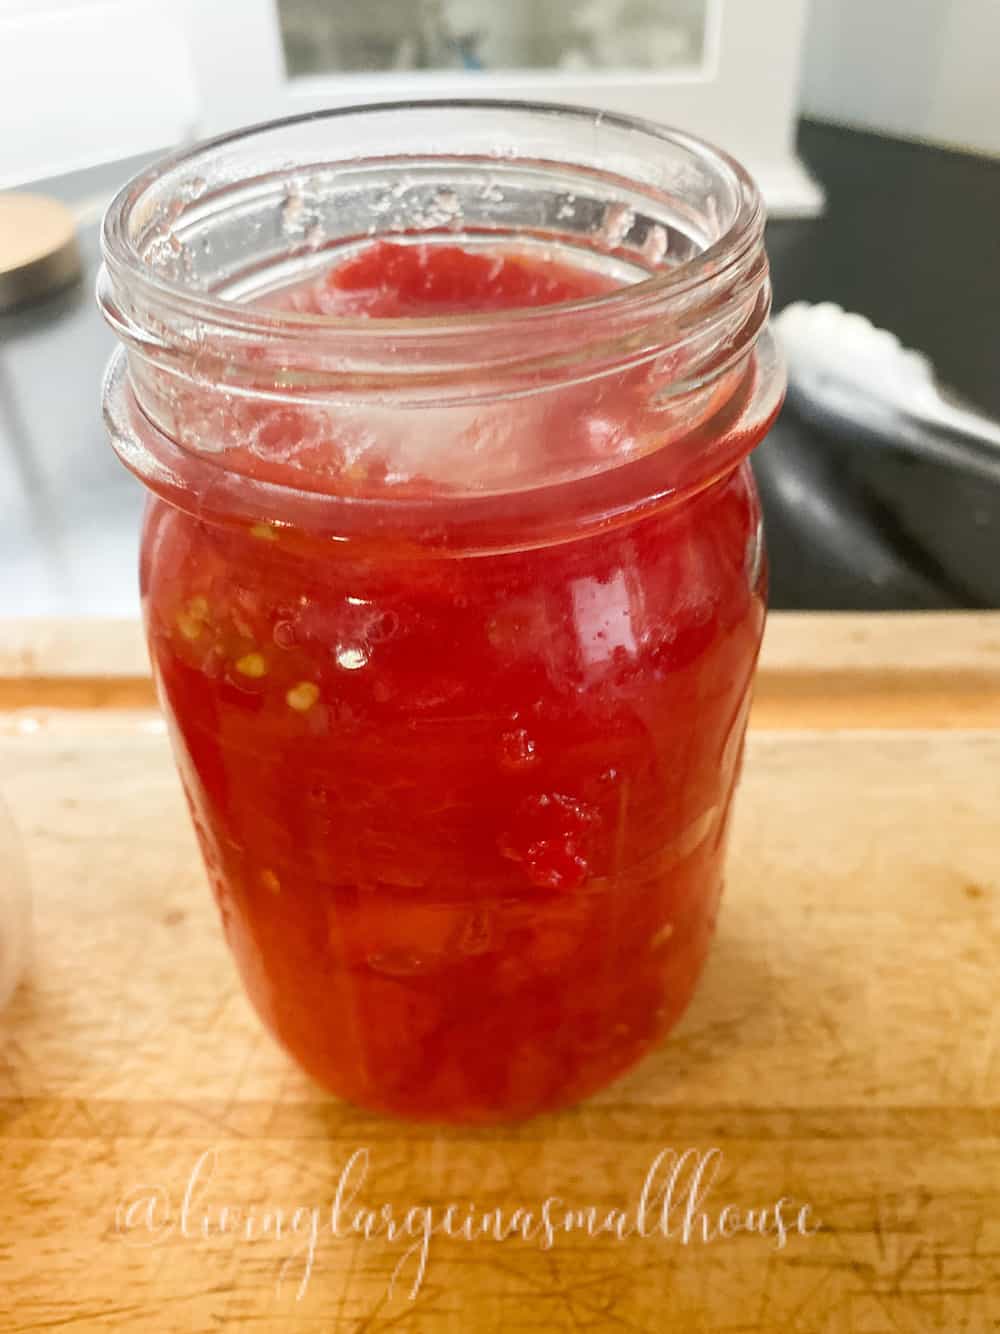 blanched tomatoes cut and packed into pint jar for fresh tomato flavor all year long